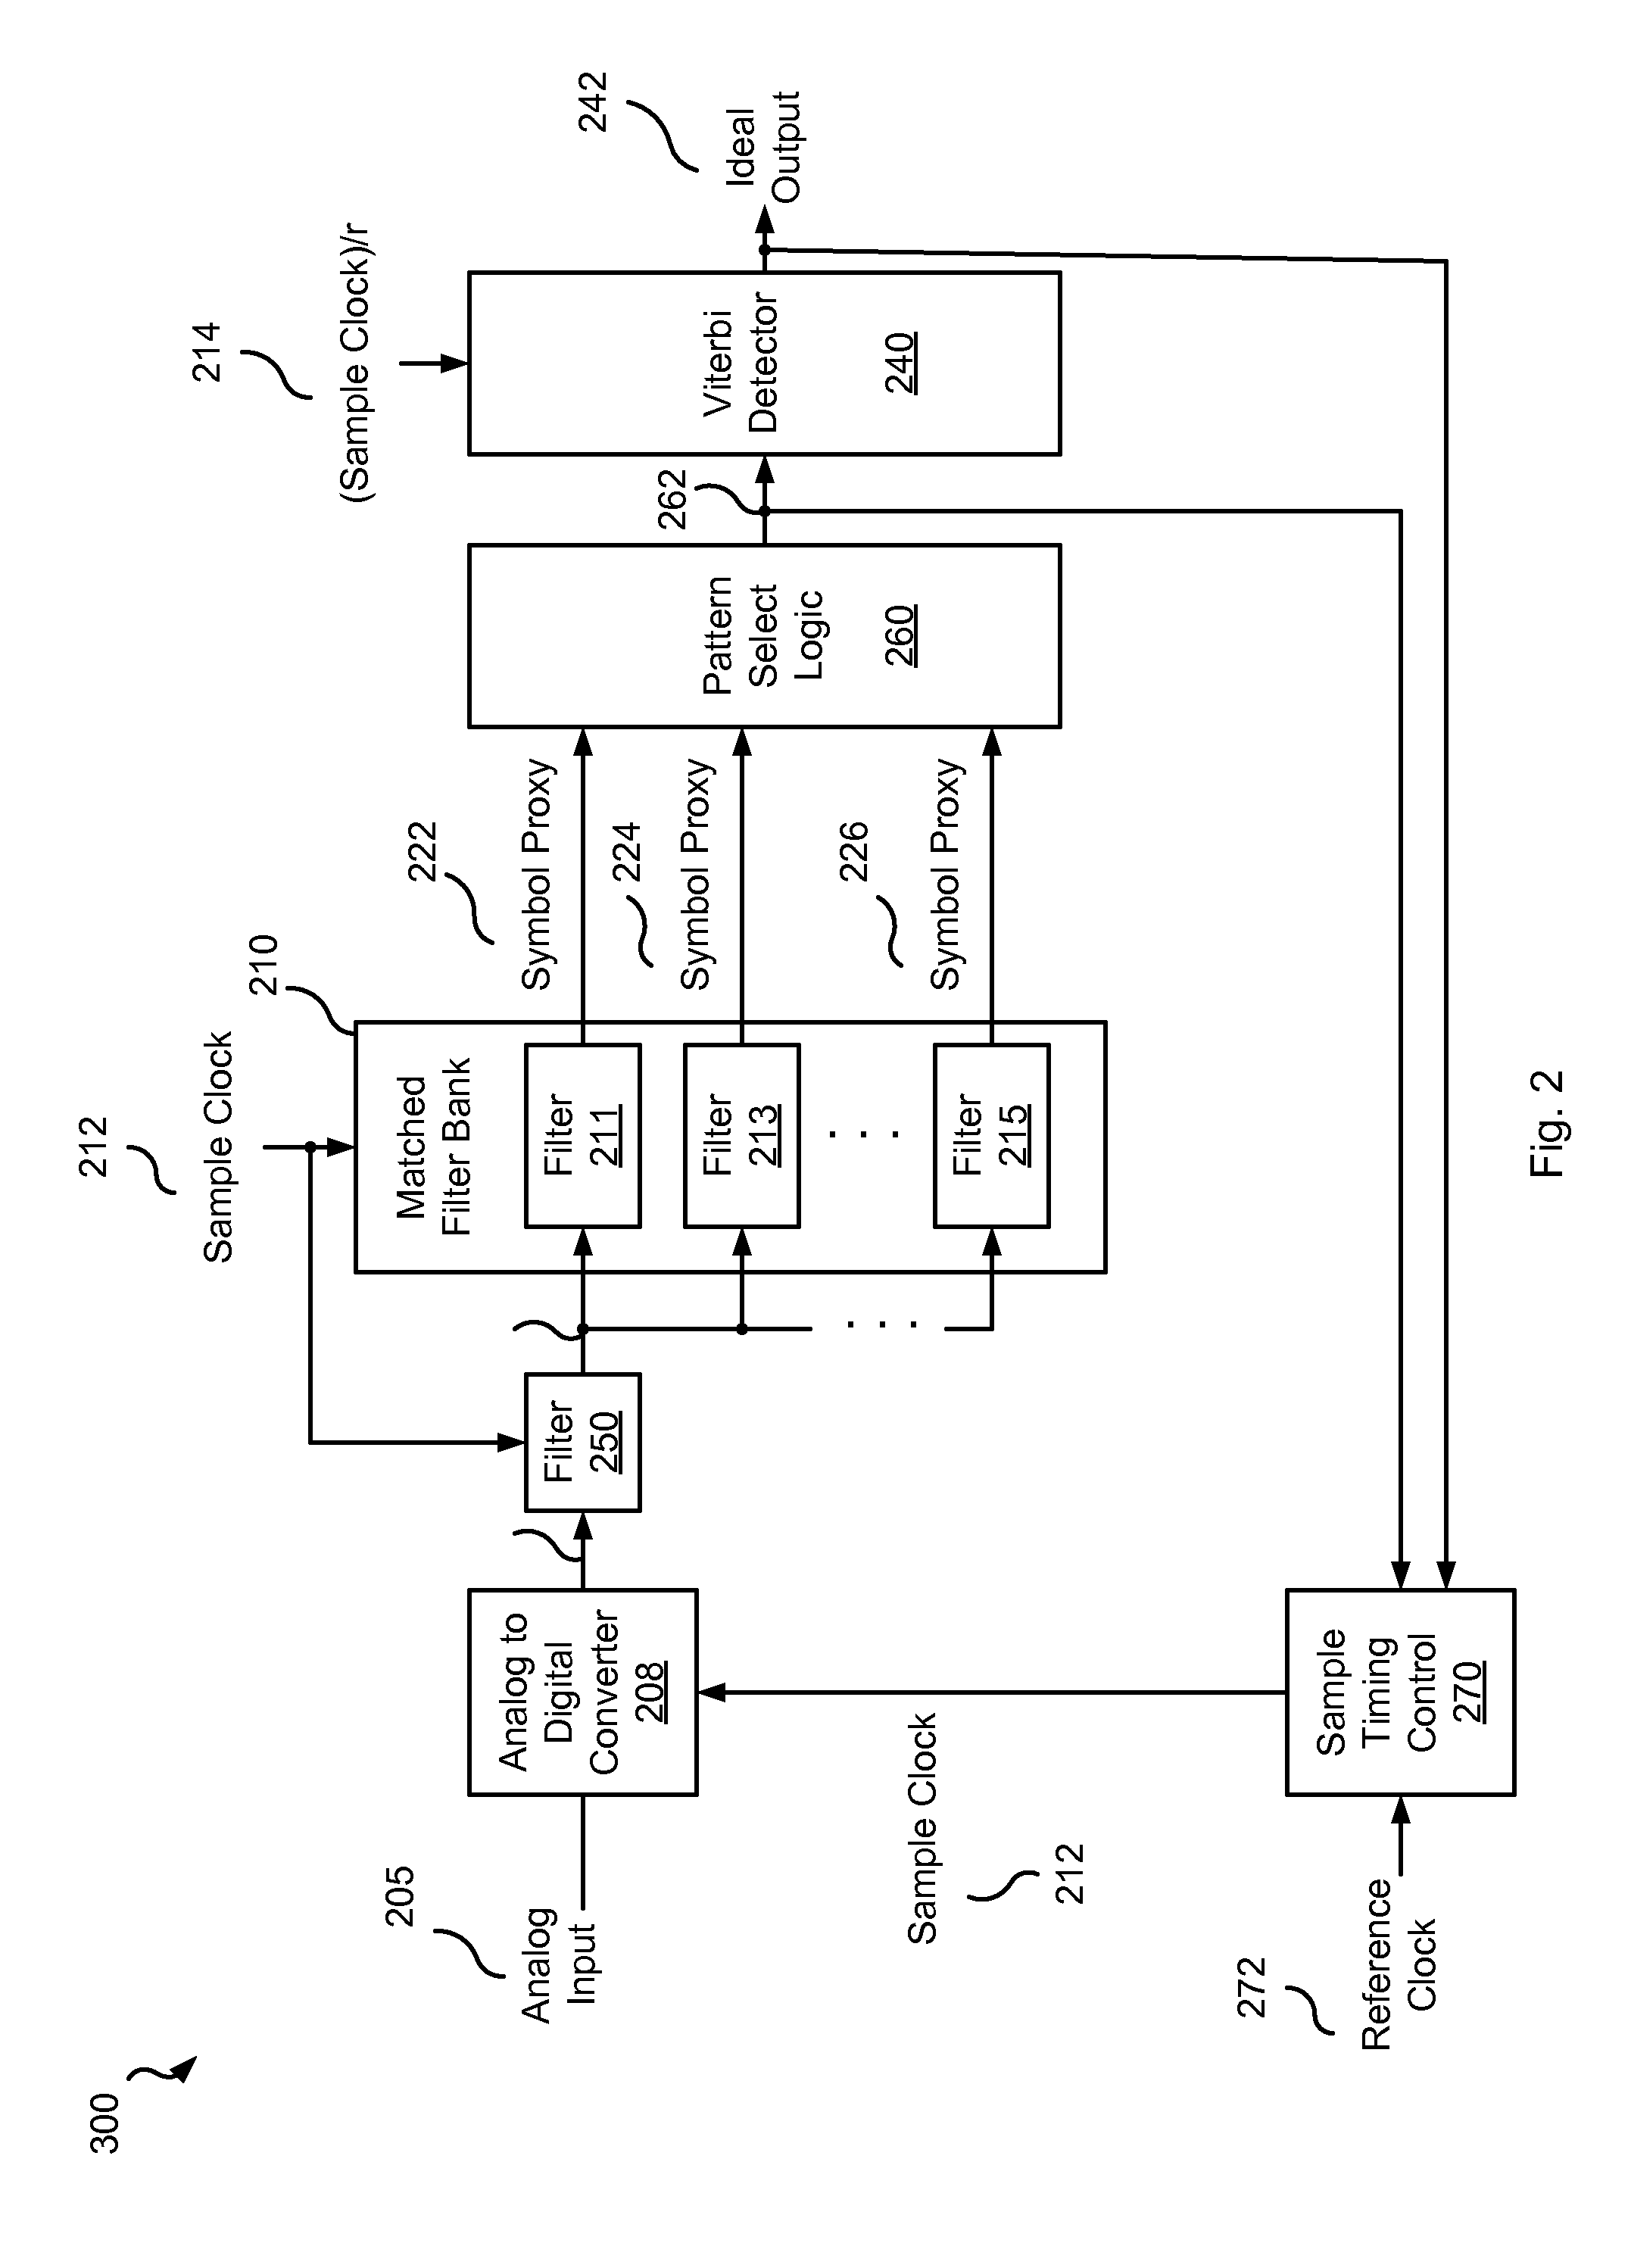 Timing Phase Detection Using a Matched Filter Set